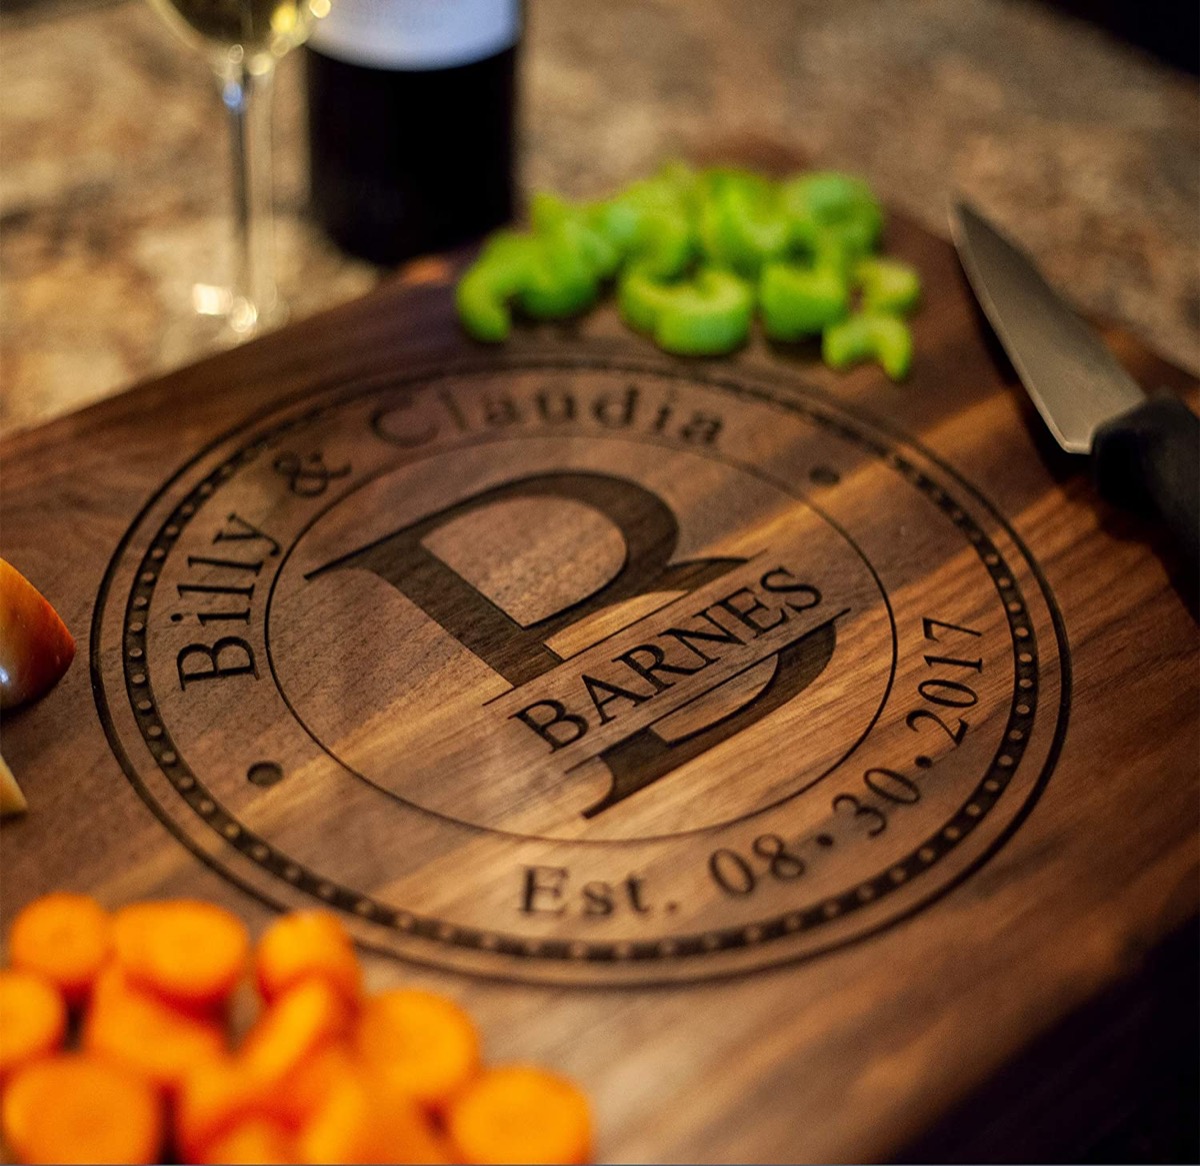 Cutting board engraved with couple's names